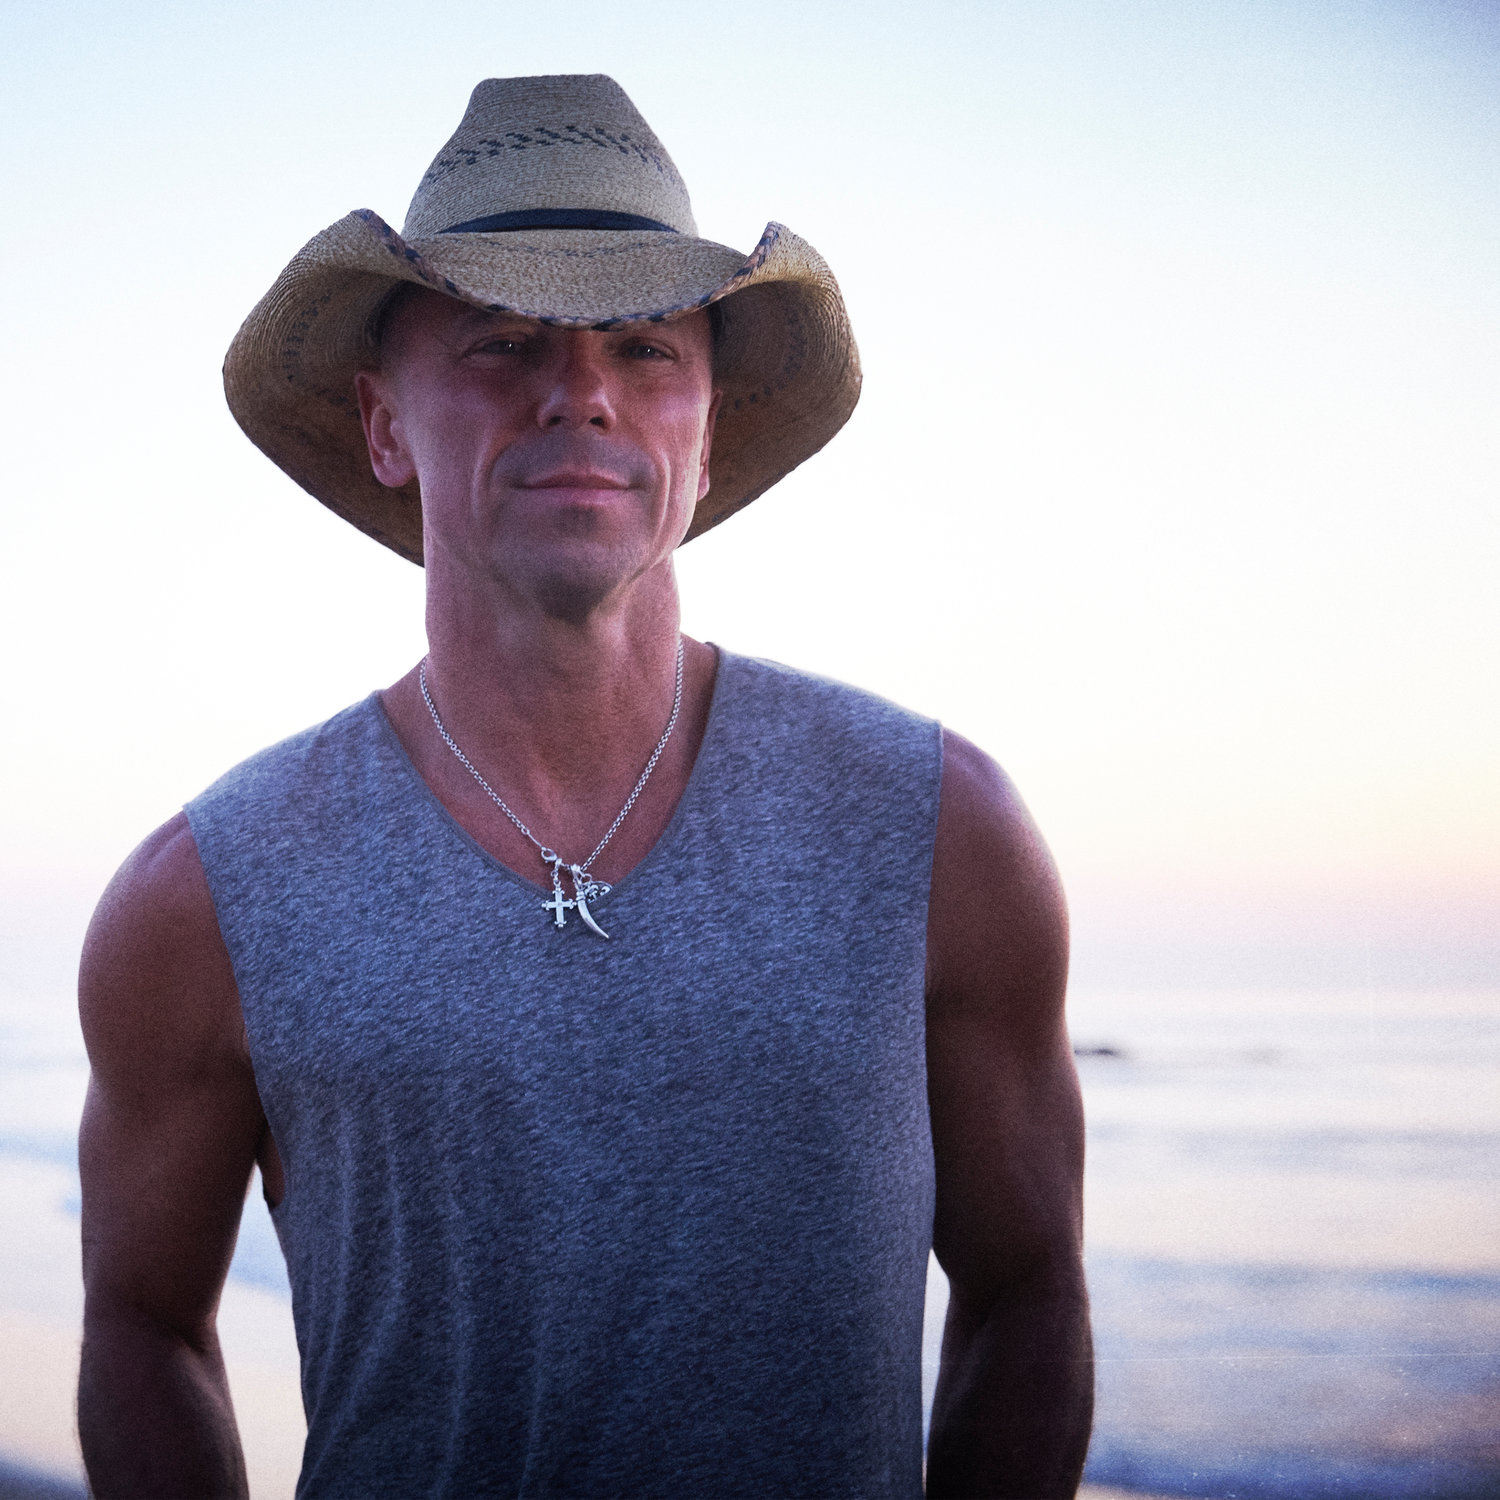 Kenny Chesney's Here and Now Tour 2022 comes to The Wharf Amphitheater May 19, 2022. Tickets go on sale Feb. 11 at 10 a.m.